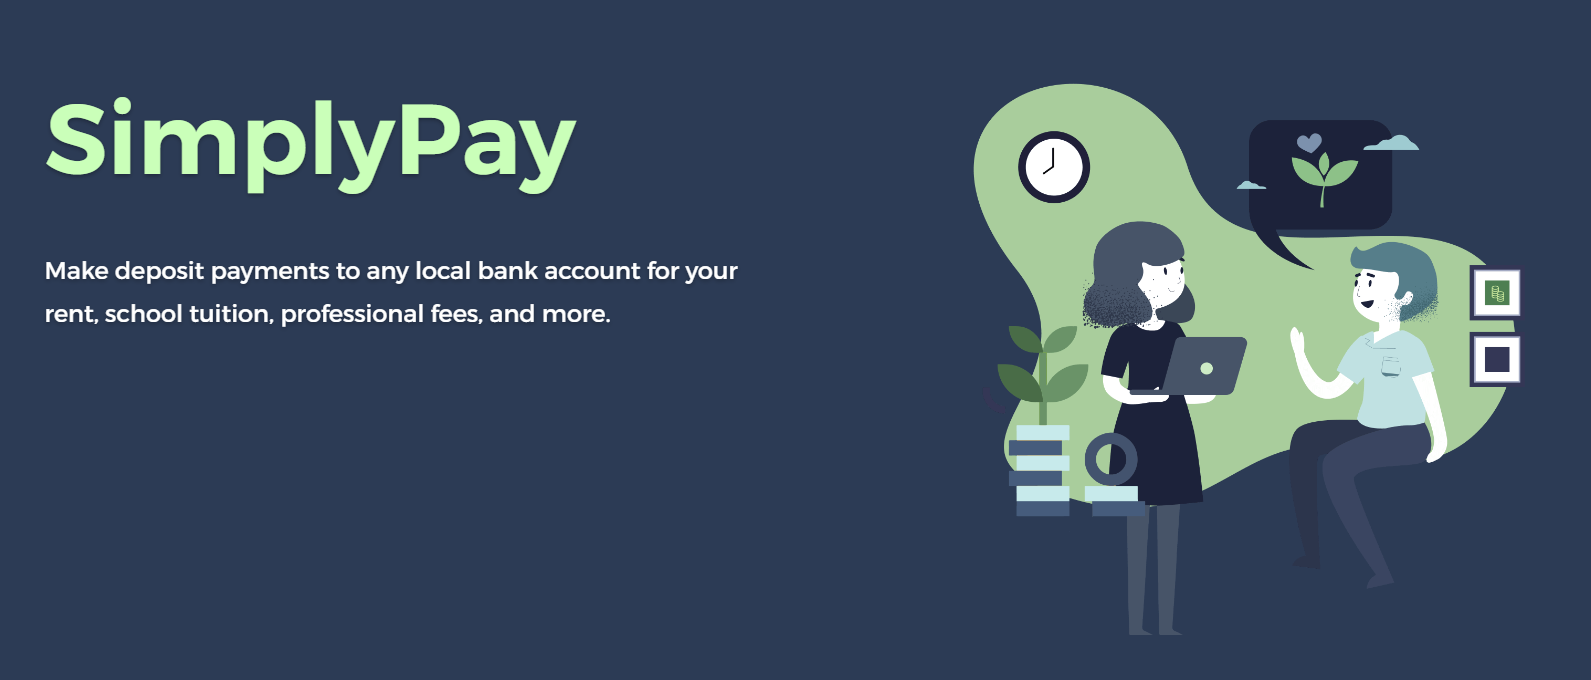 security bank credit card installment - simplypay